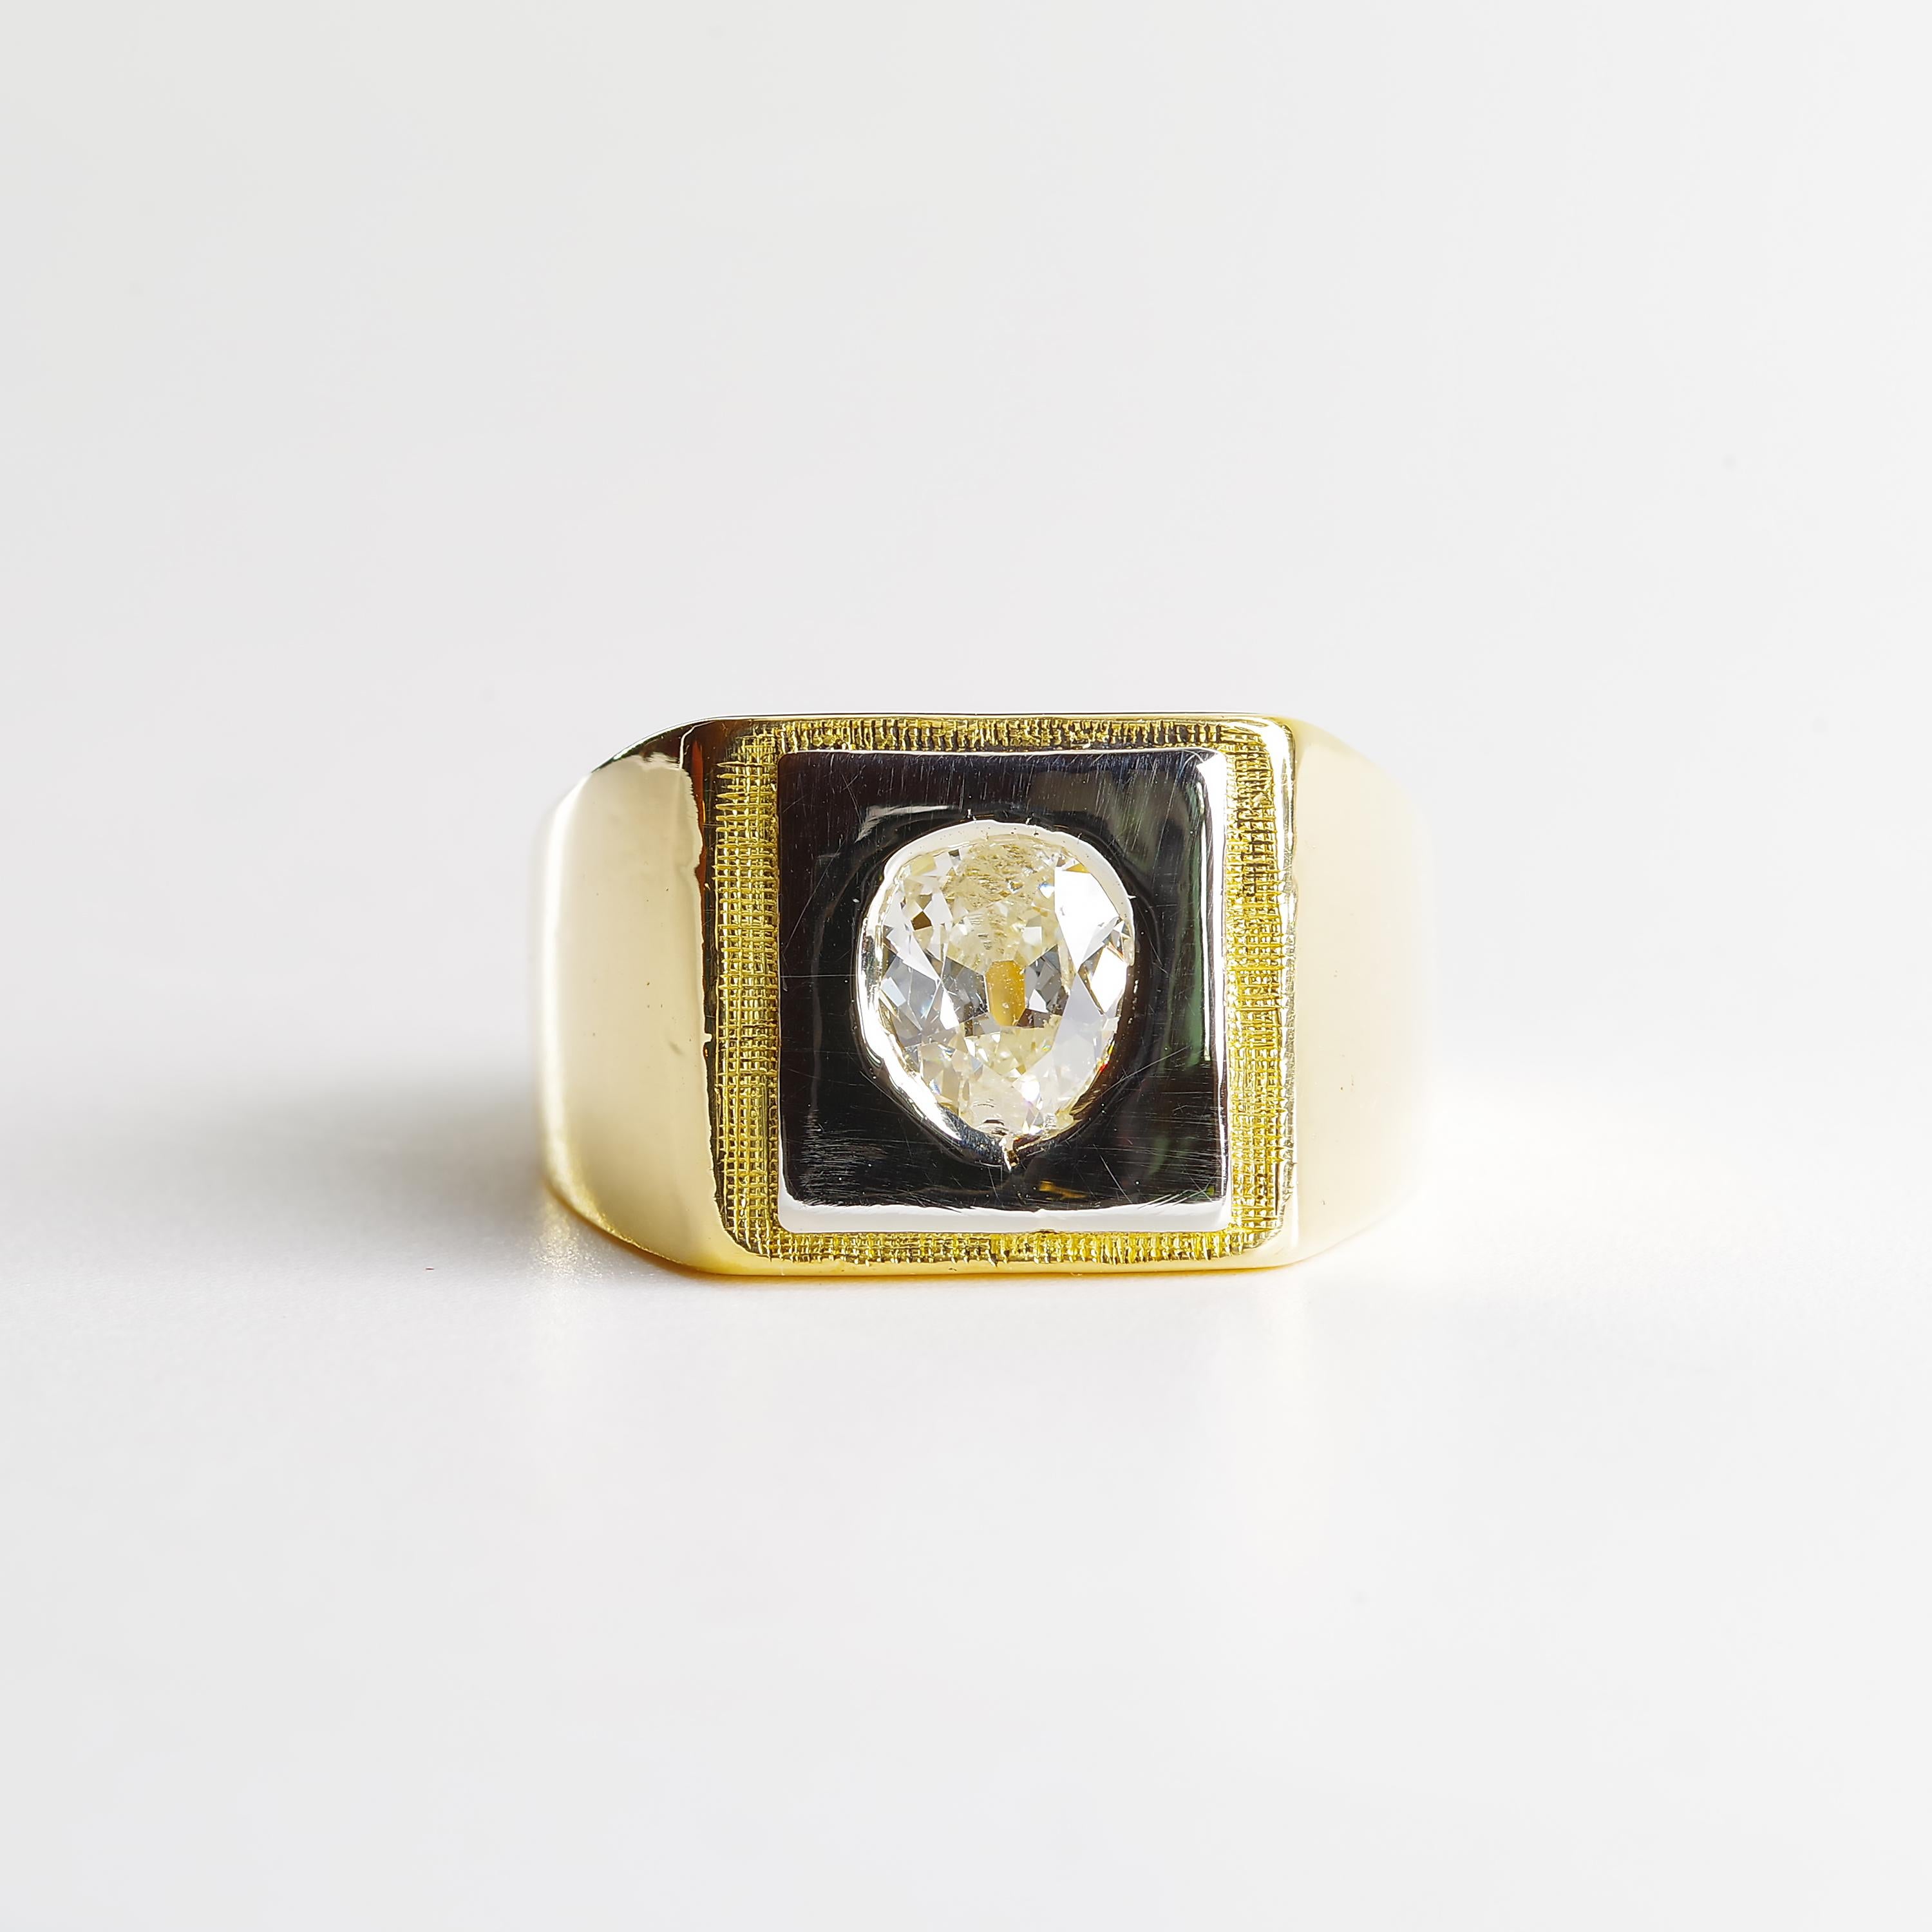 I have been collecting rings since I was five. Nonstop. Some rings stand out and this is one of them. It's impeccable: handcrafted in France around 1940, this retro-period men's ring is made from 18K yellow gold and faced with a thick slab of 18k